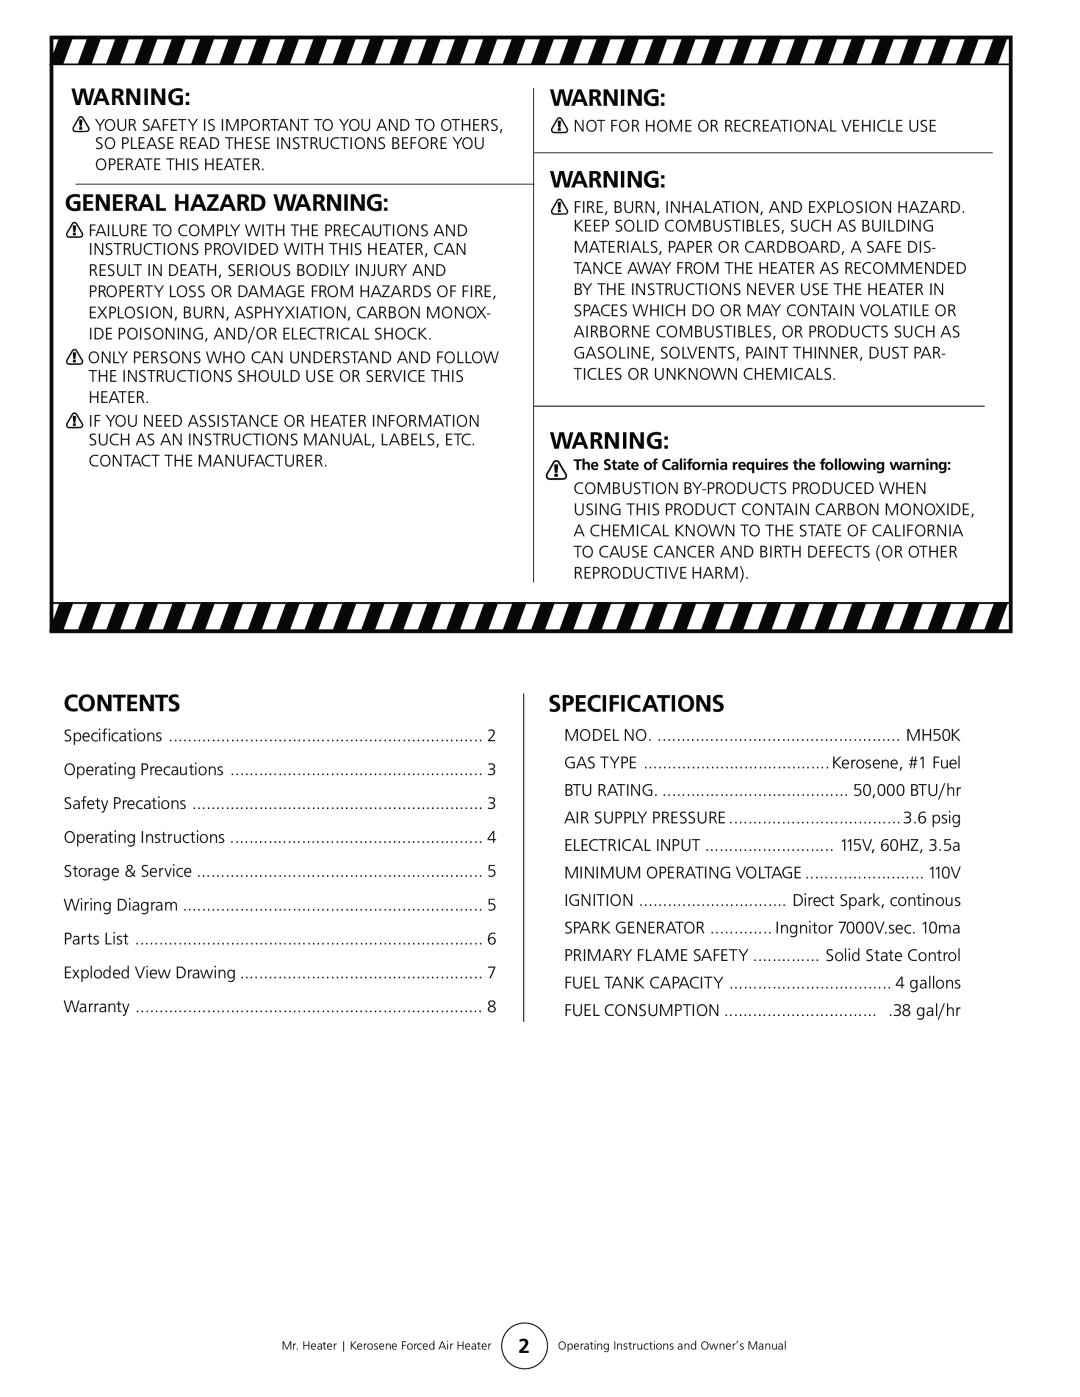 Mr. Heater MH50K operating instructions General Hazard Warning, Contents, Specifications 